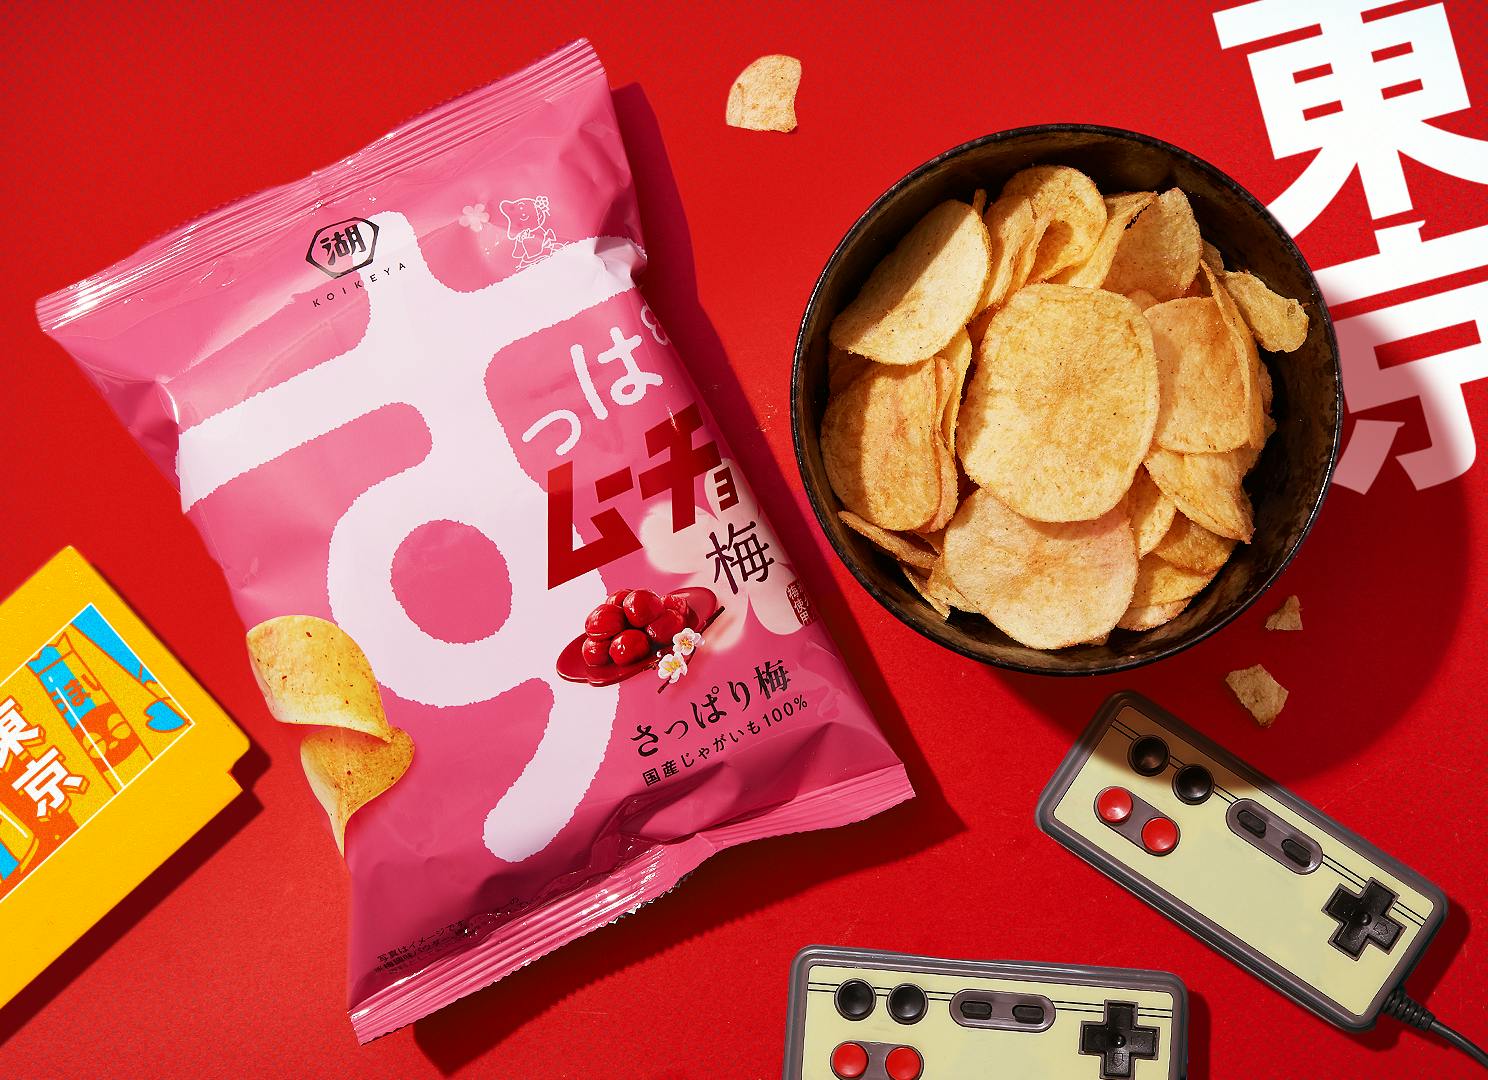 Koikeya Ume Chips sit on a red background, surrounded by Tokyo motifs.